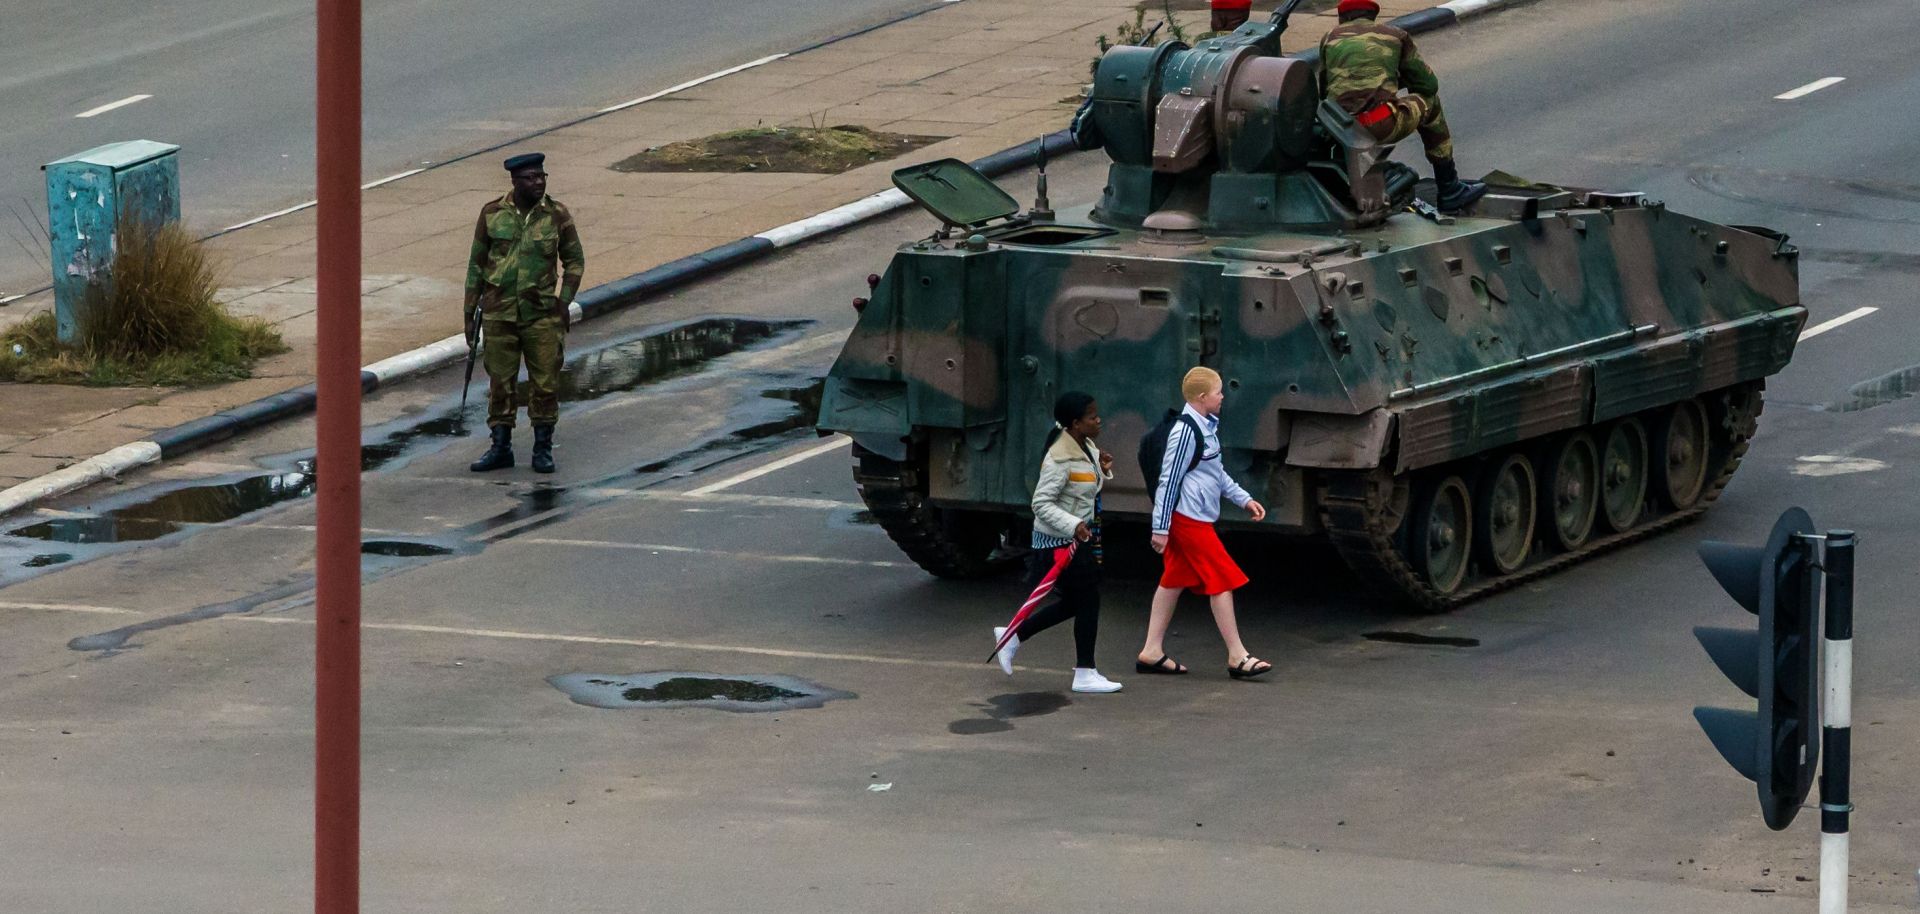 Two young women walk past an armored personnel carrier in Zimbabwe's capital, Harare, under the watch of soldiers regulating traffic.